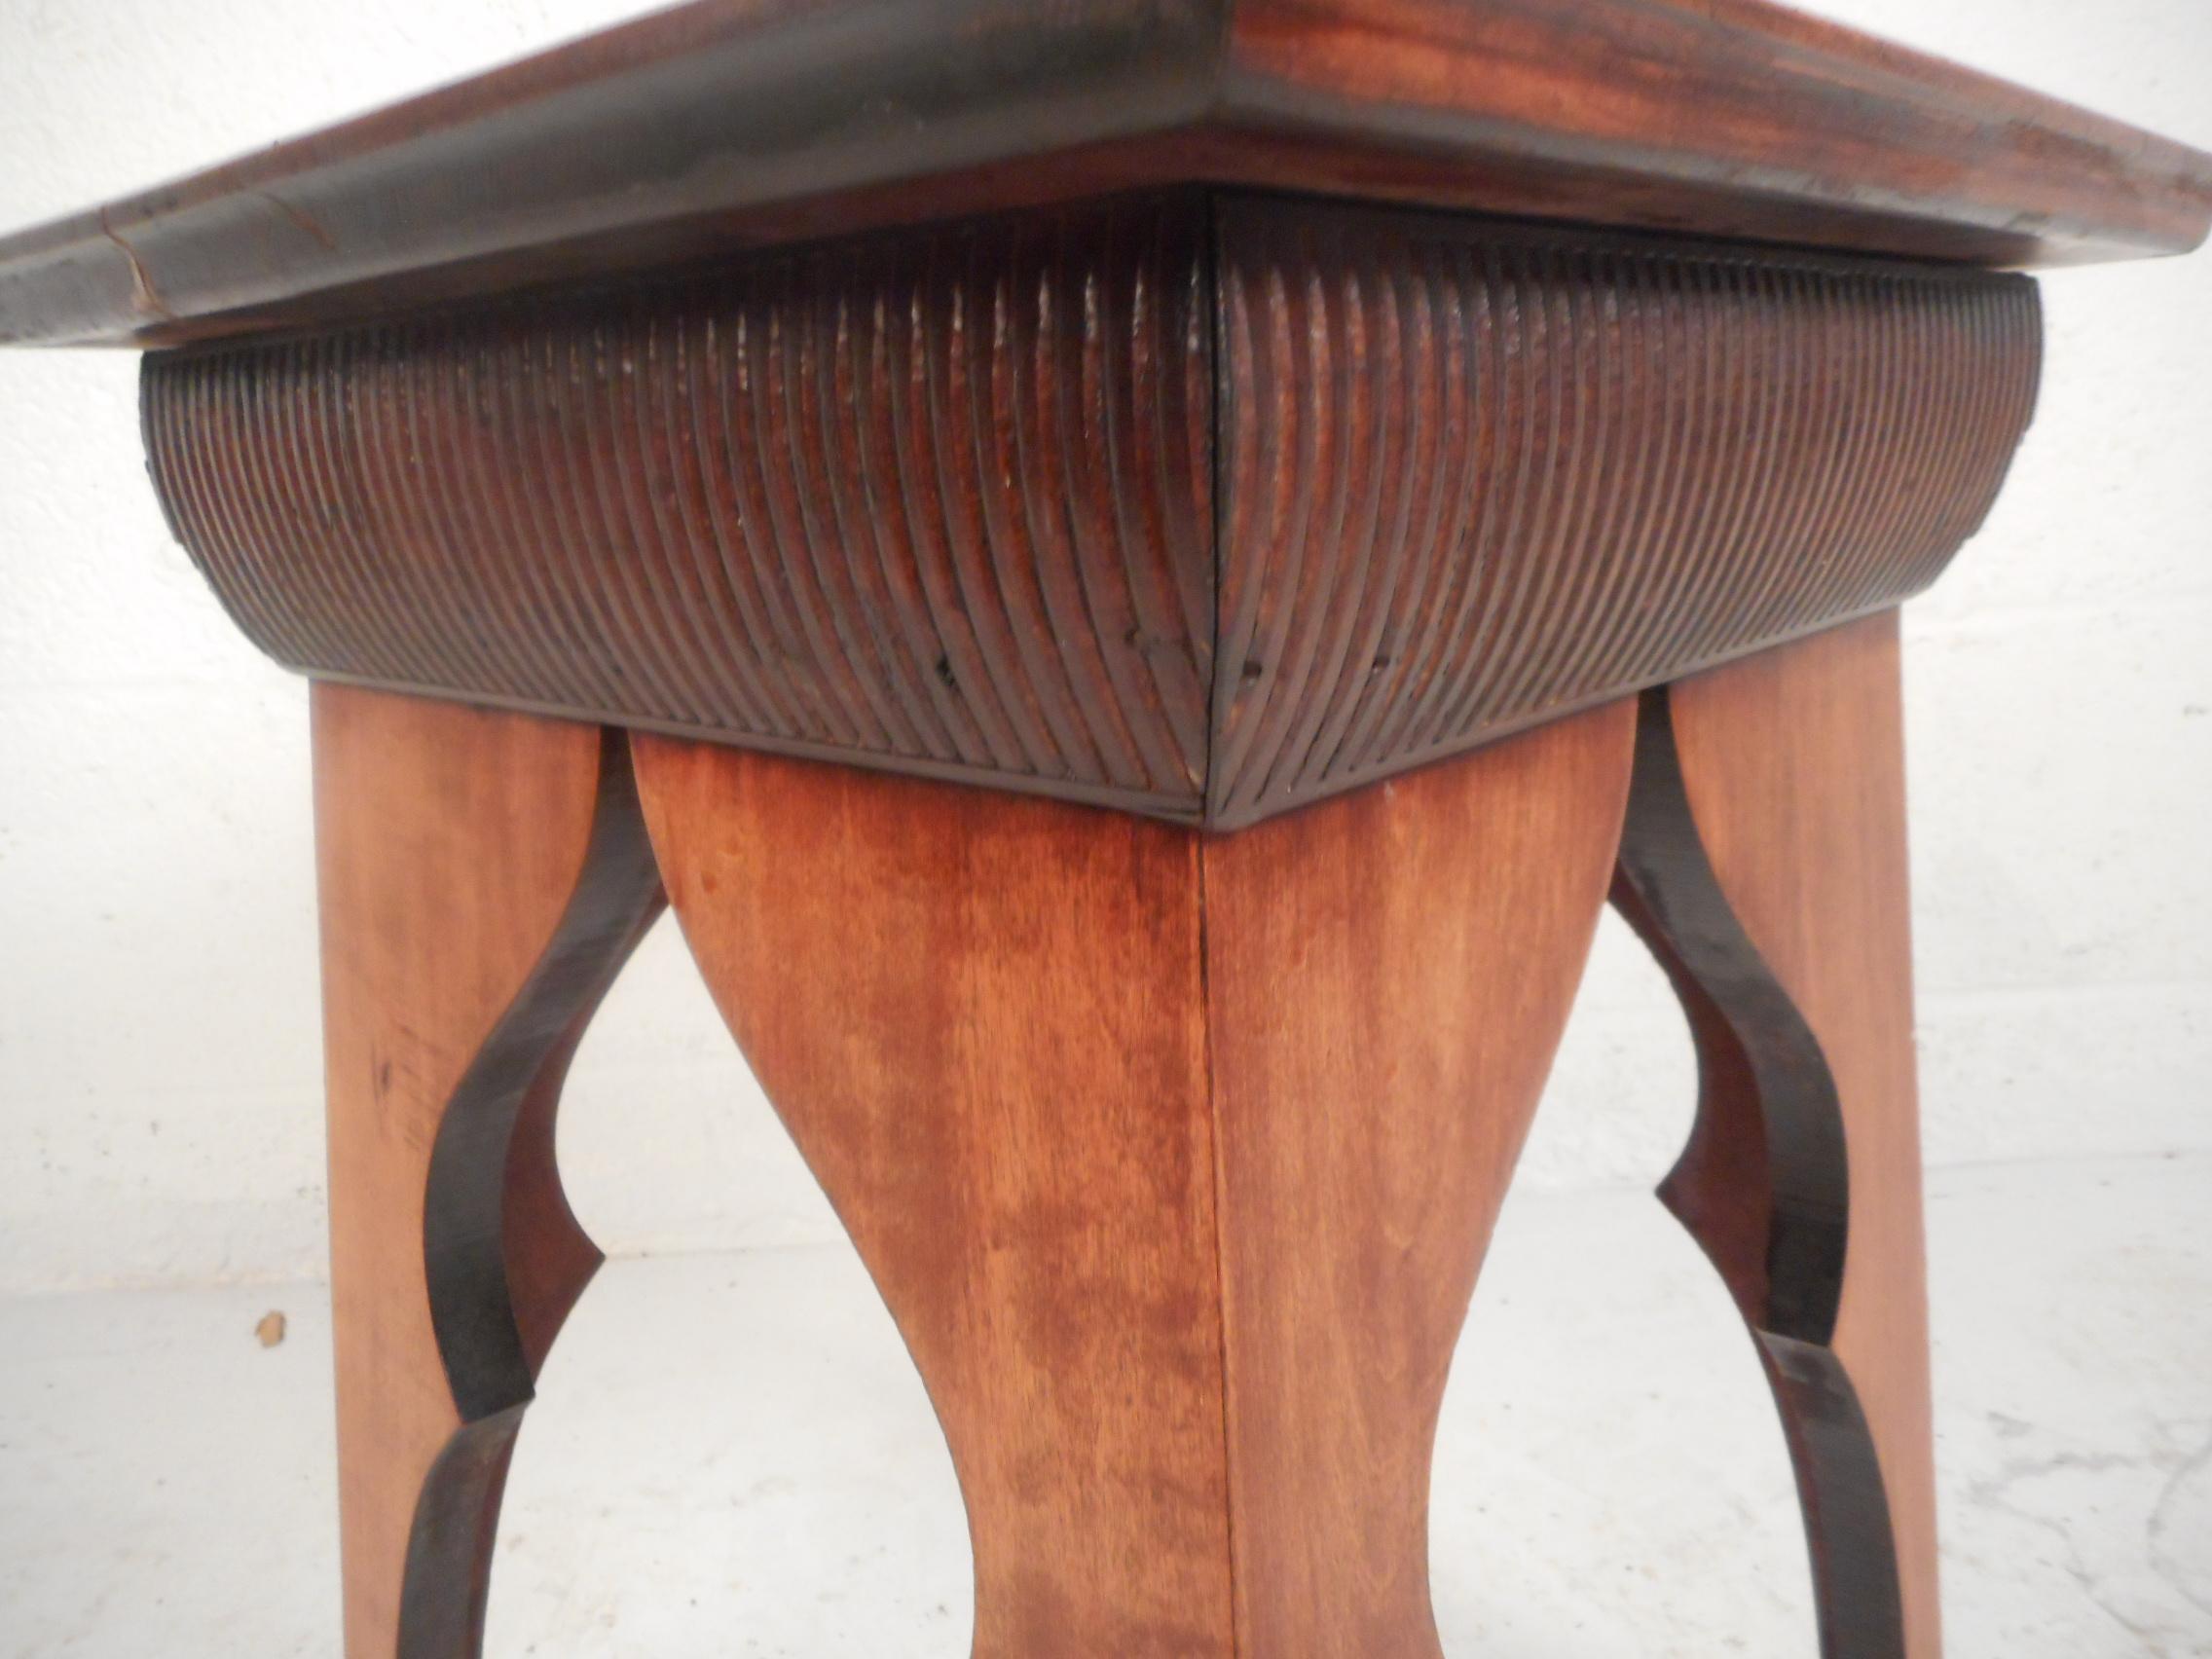 Wood Small Mid-Century Modern Sculpted Side Table or Pedestal